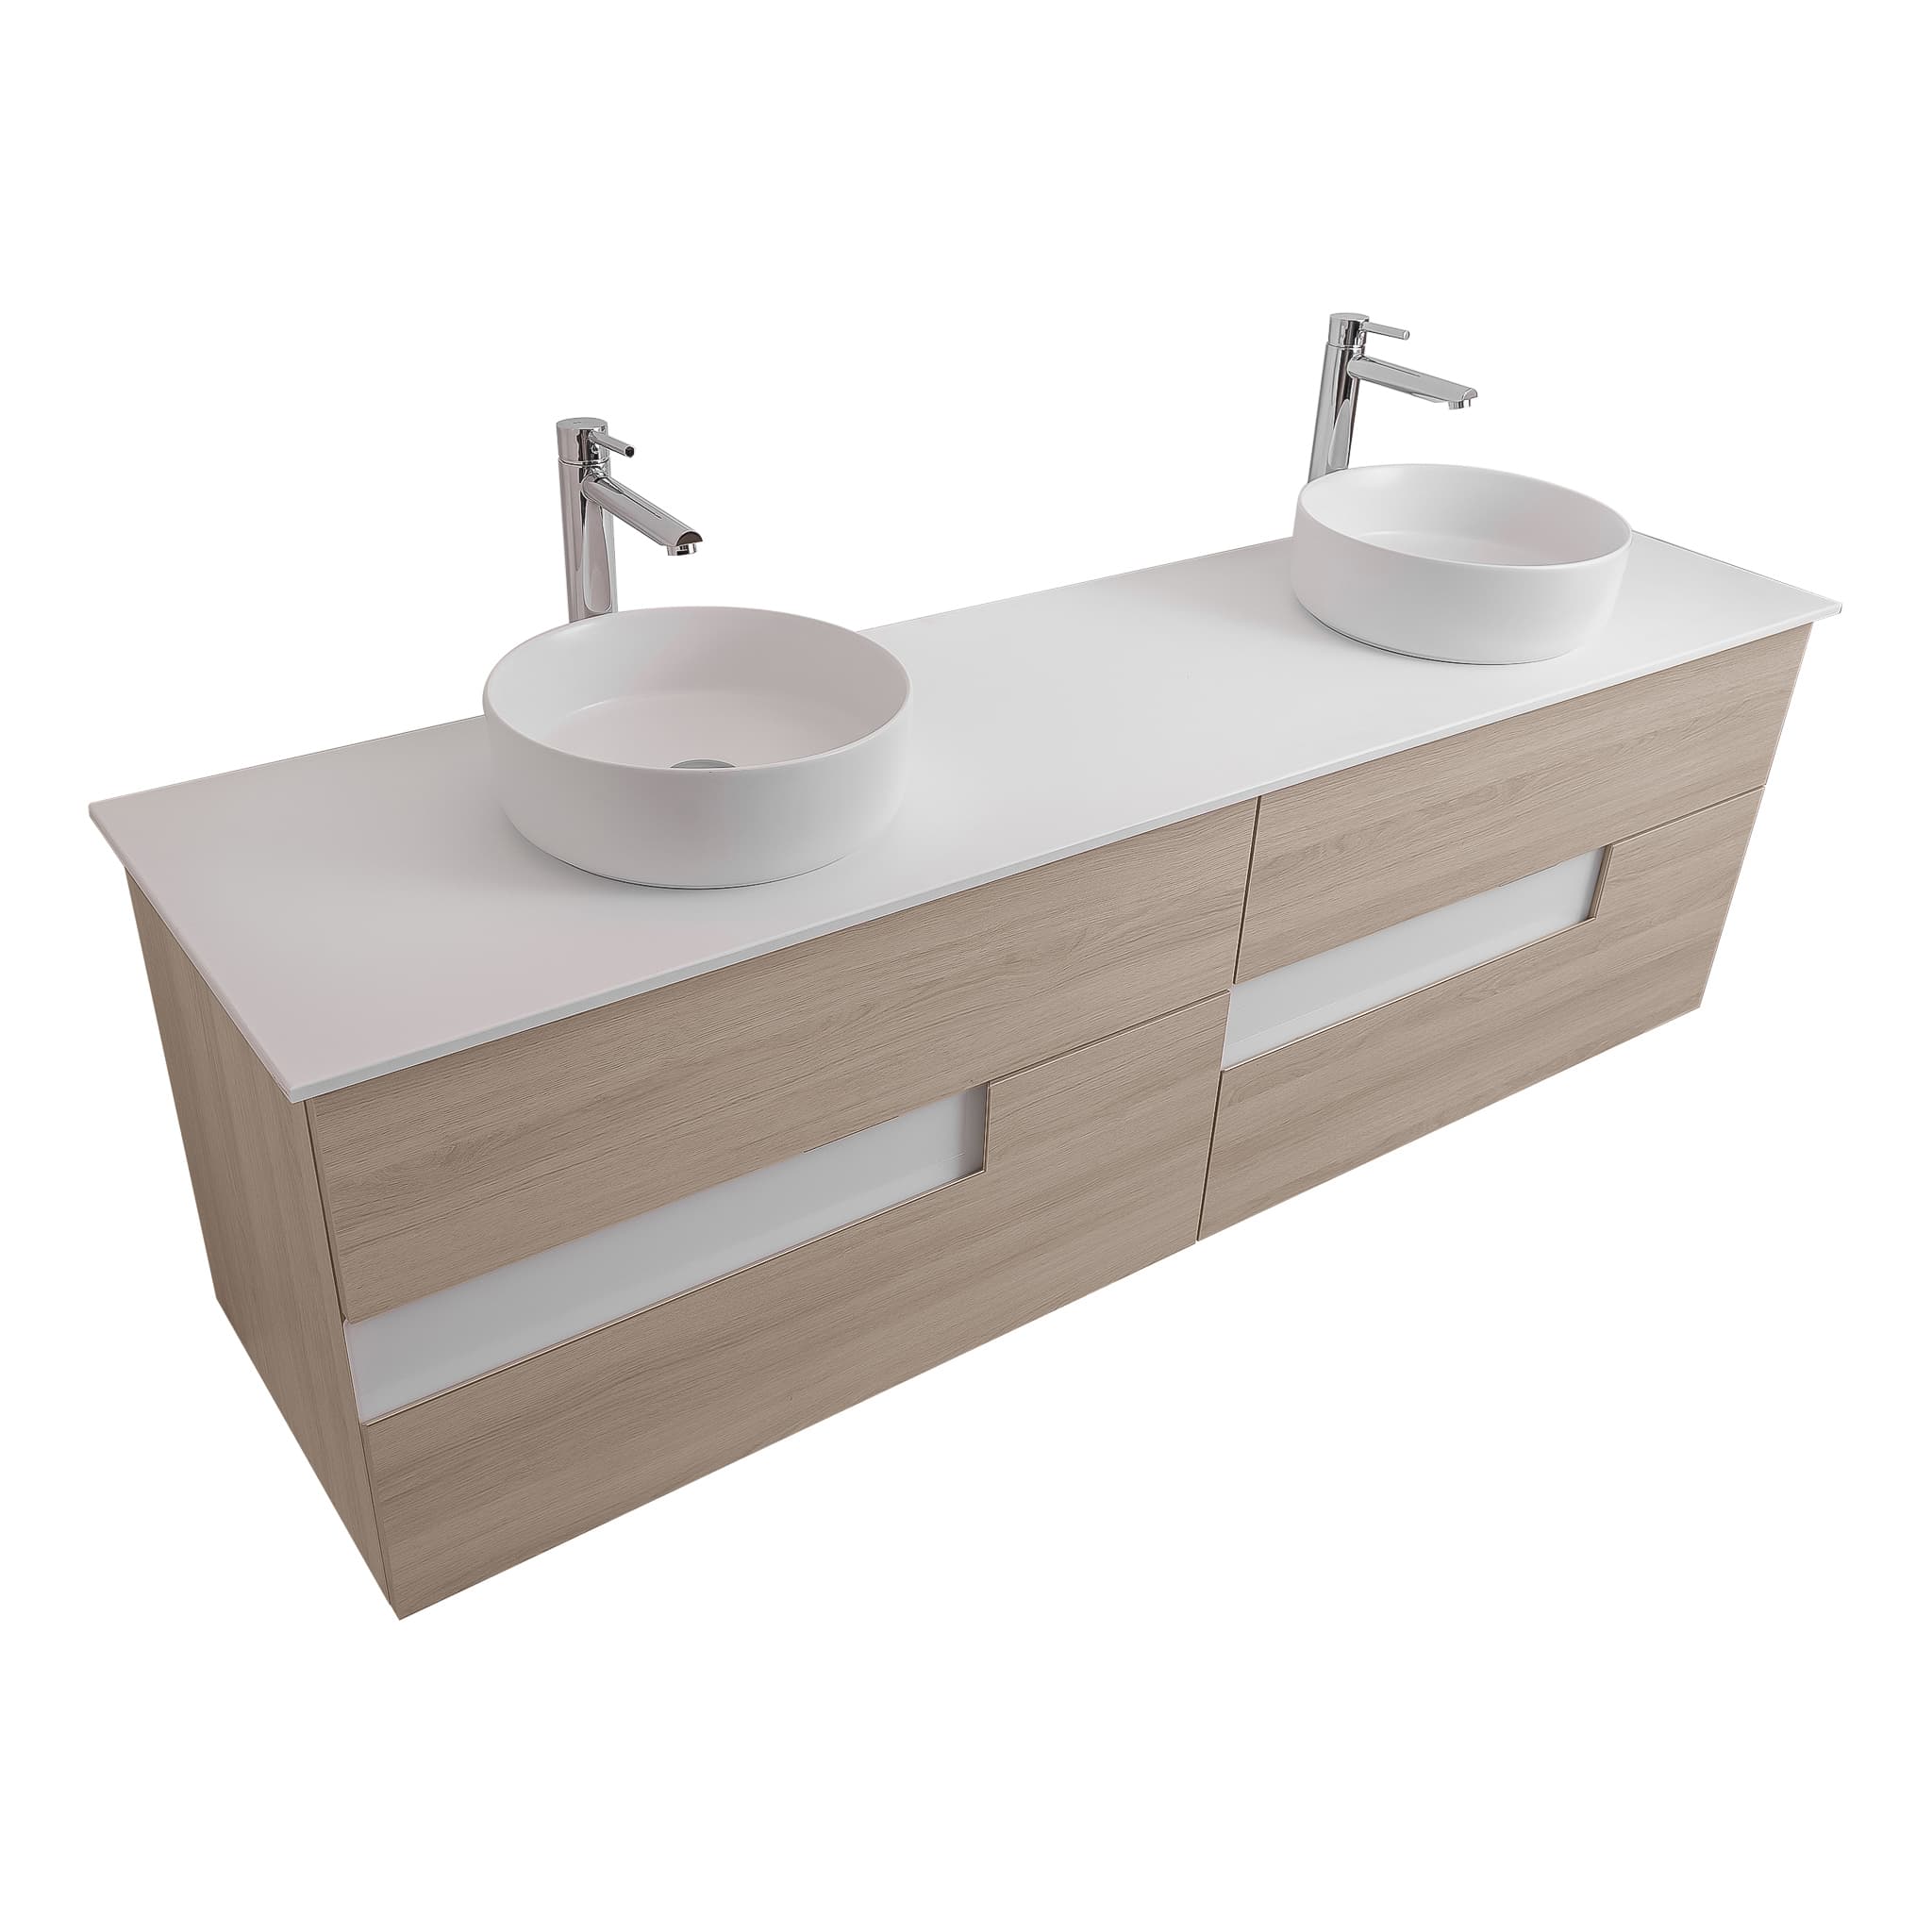 Vision 72 Natural Light Wood Cabinet, Ares White Top And Two Ares White Ceramic Basin, Wall Mounted Modern Vanity Set